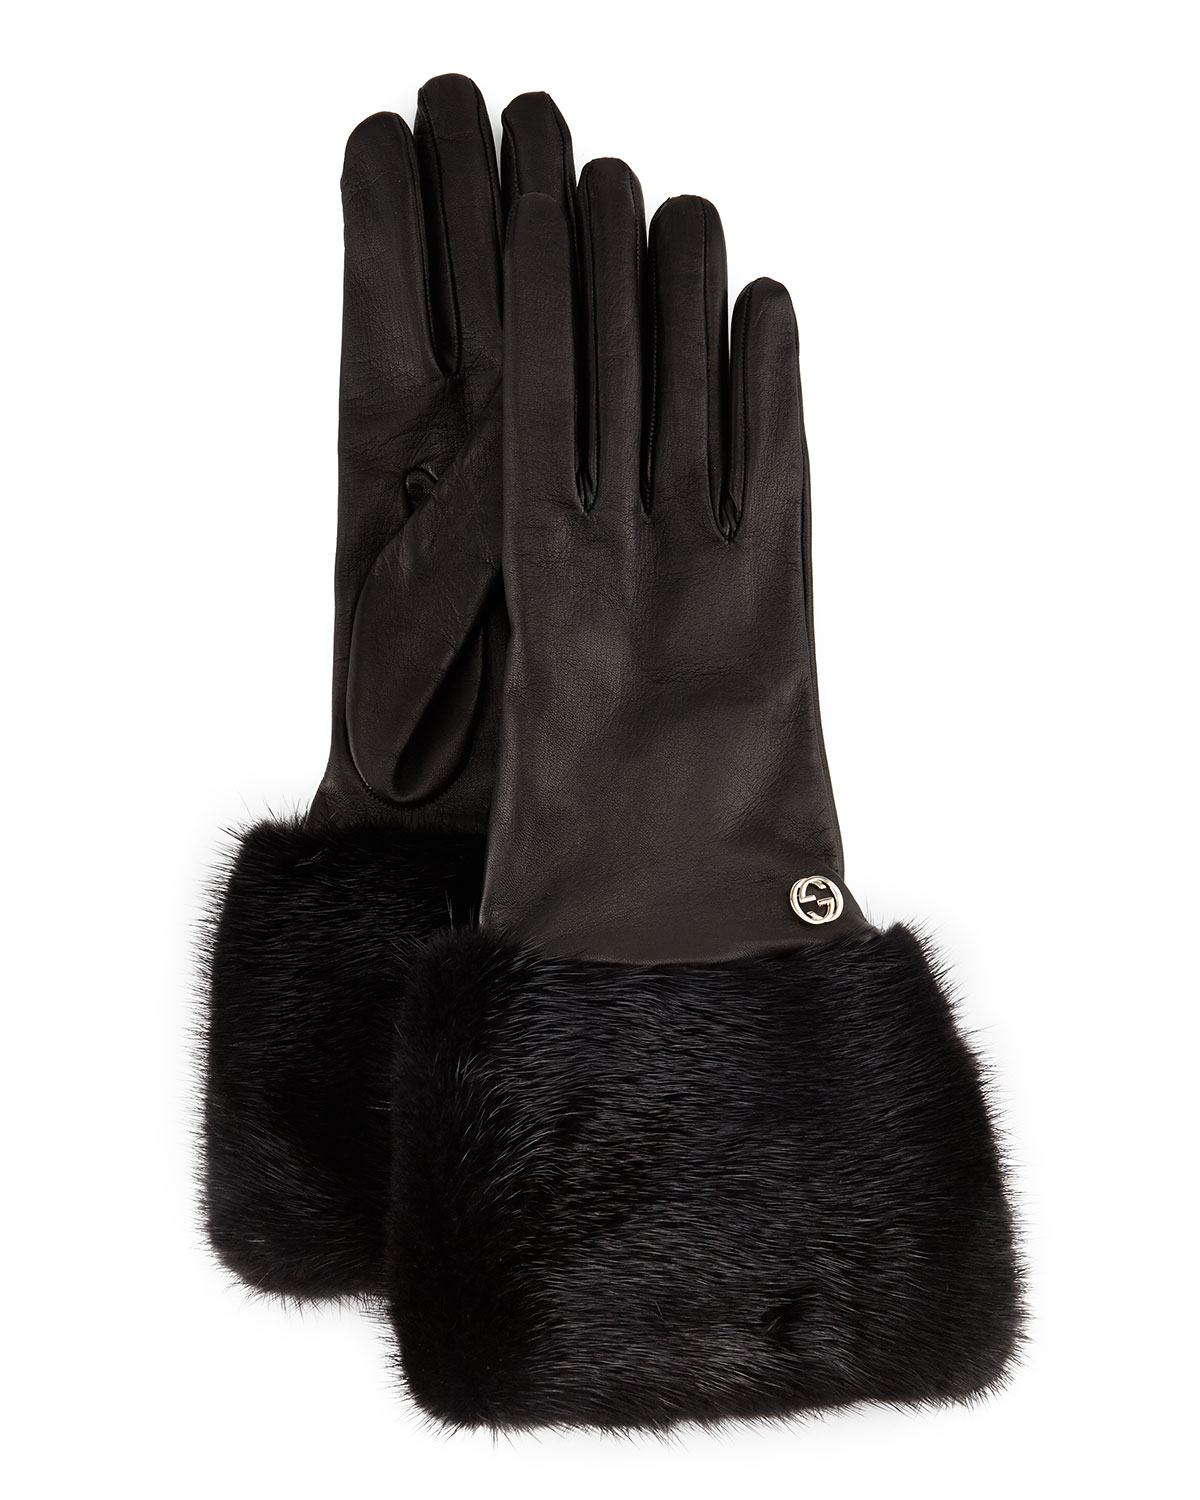 Lyst - Gucci Women's Fur Leather Gloves in Black